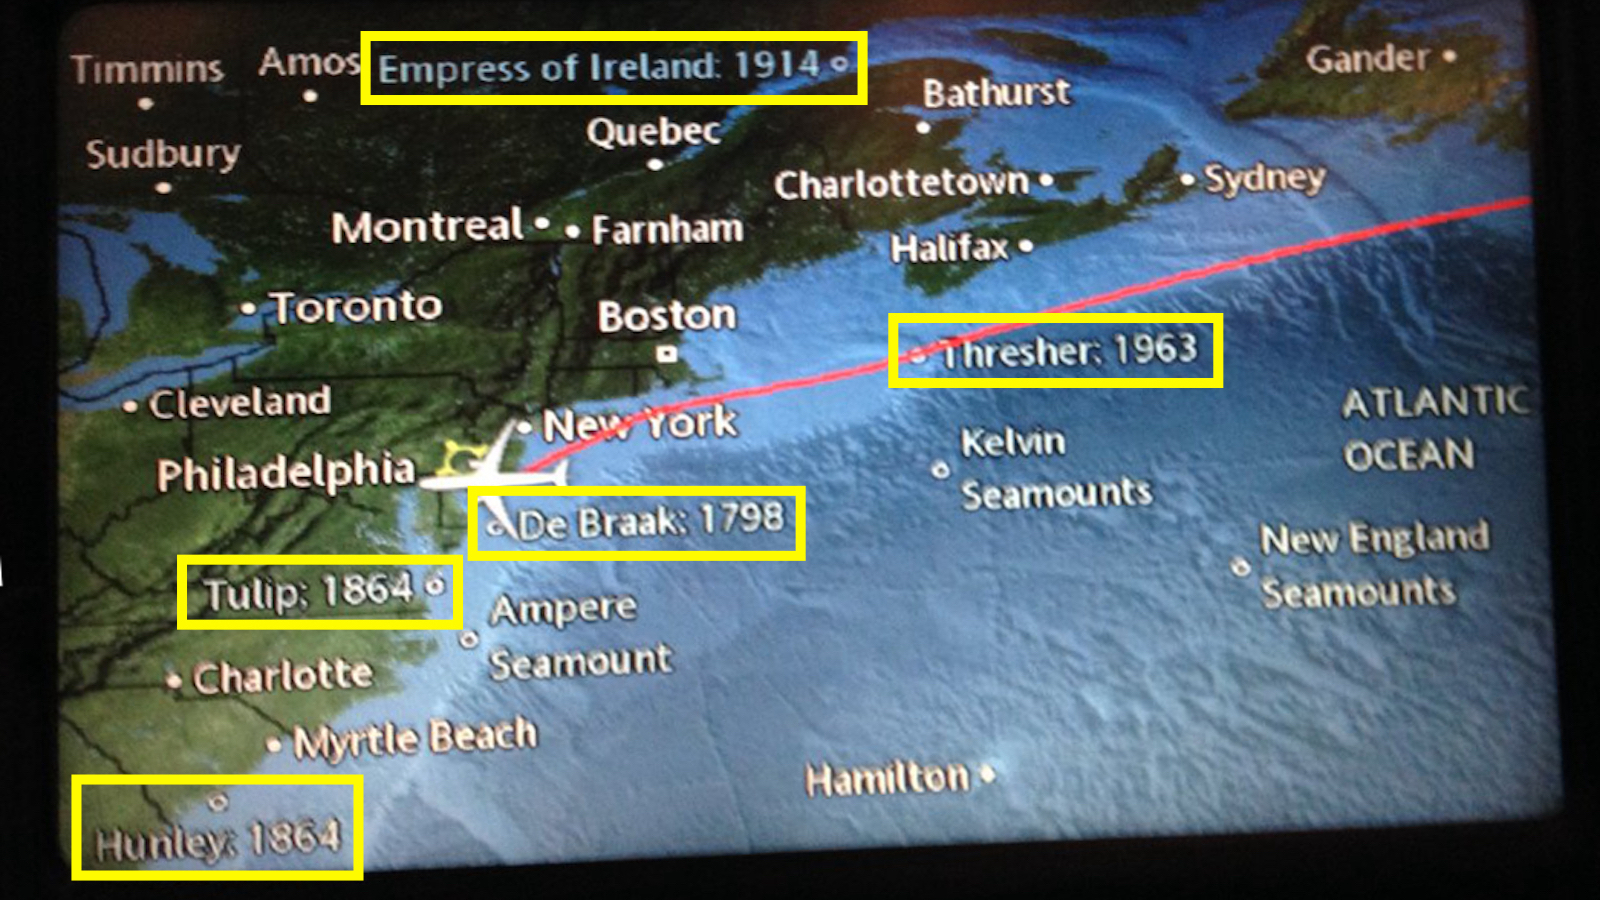 American Airlines in-flight map showing shipwrecks near the North American coast